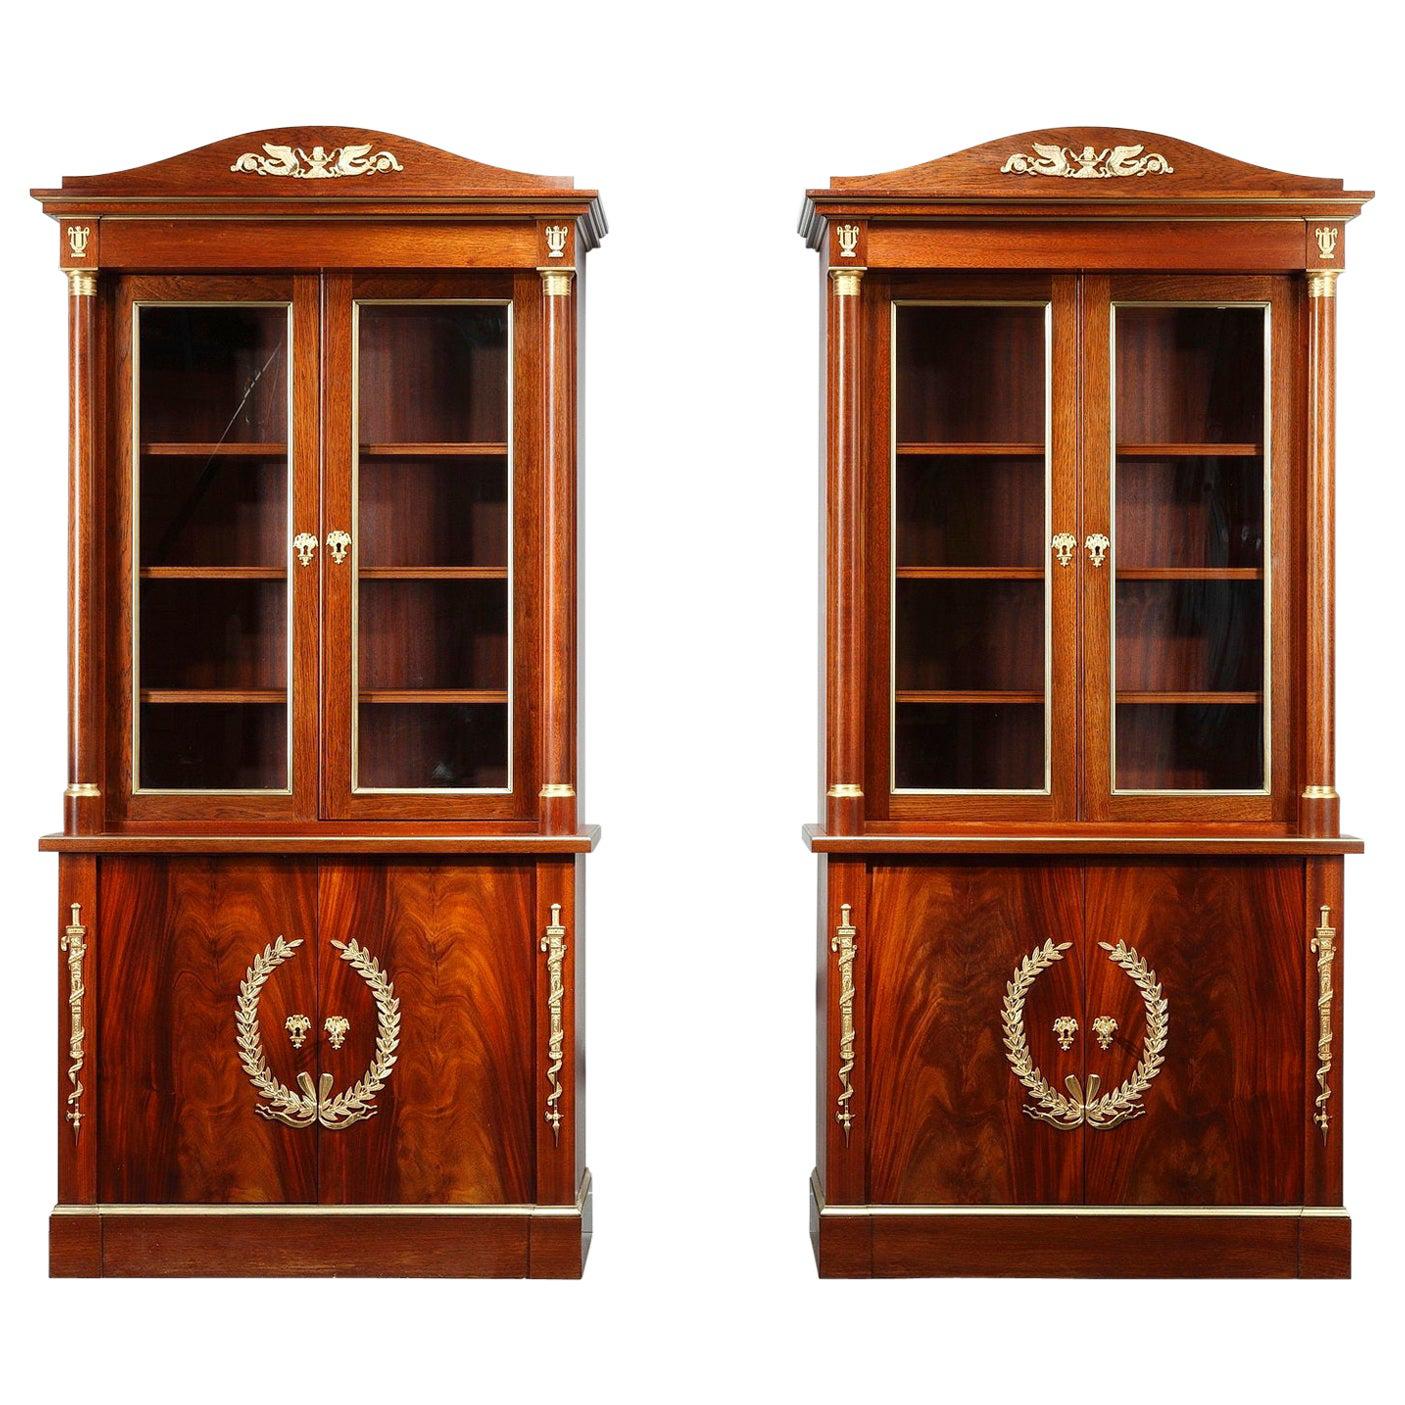 Early 19th Century Empire-Style Bookcases by Maison Jansen